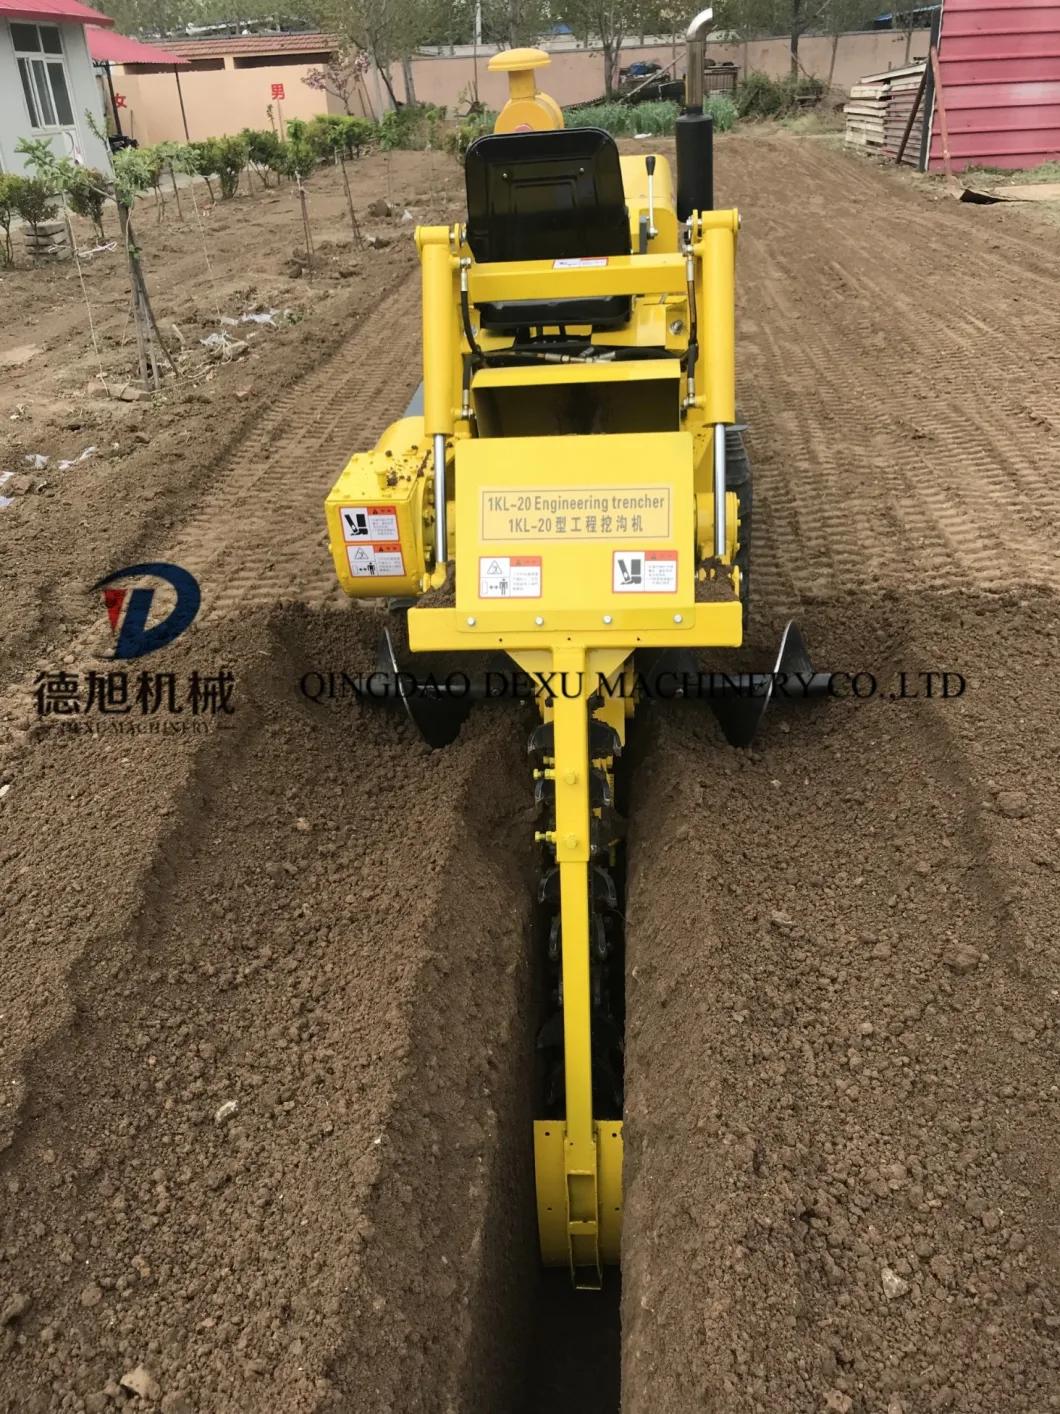 High Quality Chain Cable Trencher Machine